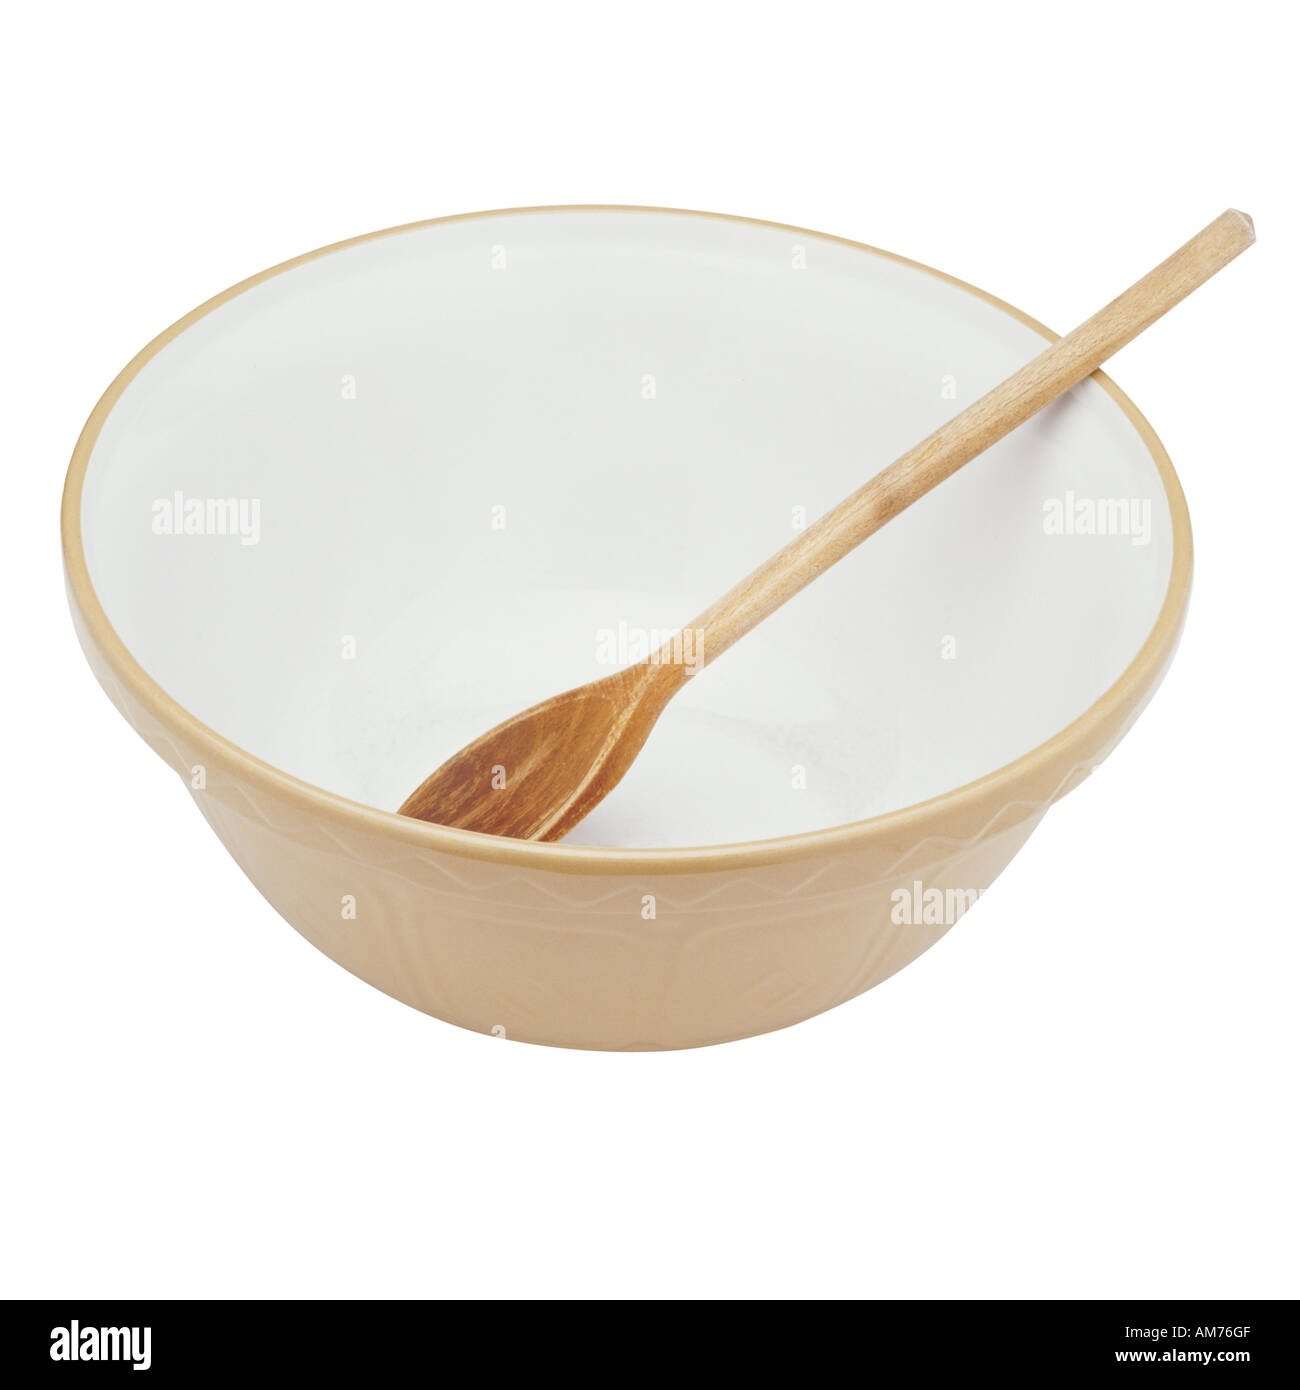 https://c8.alamy.com/comp/AM76GF/a-mixing-bowl-and-wooden-spoon-AM76GF.jpg